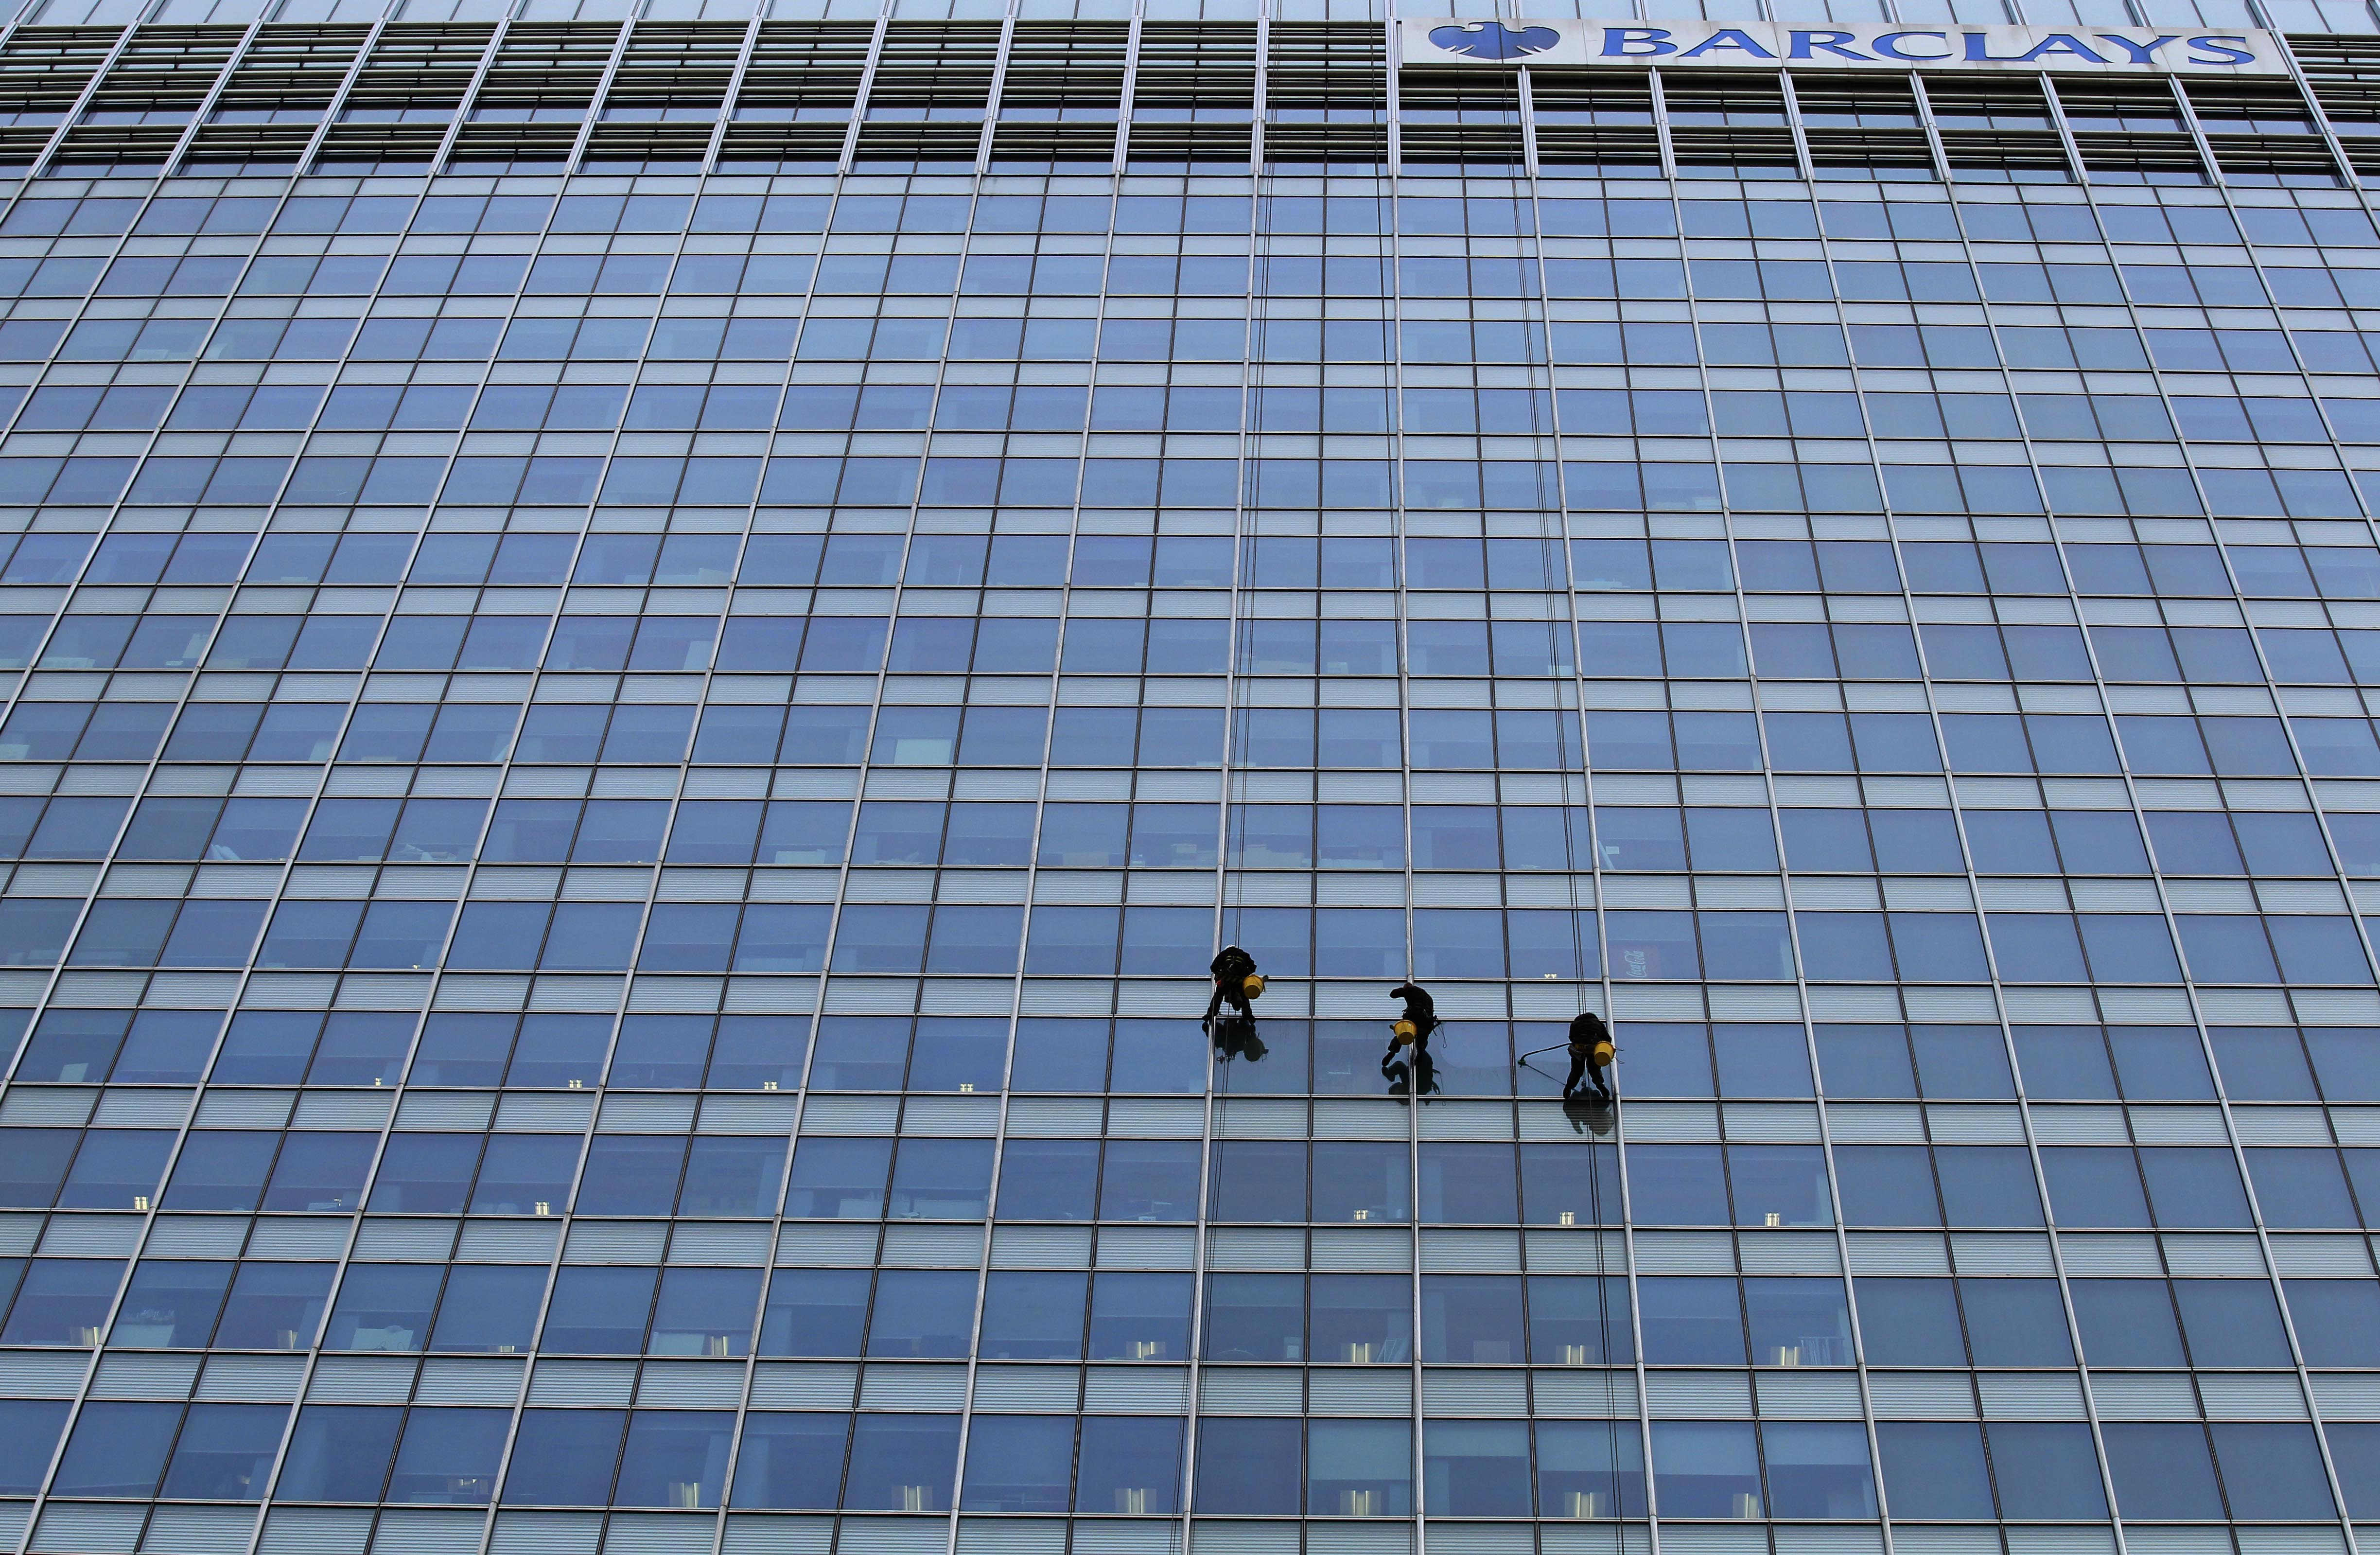 Workers clean the side of the One Churchill Place skyscraper, of which 32 floors serve as the headquarters of Barclays Bank, in the Canary Wharf business district of London, Friday, May 6, 2011.  (AP Photo/Matt Dunham)